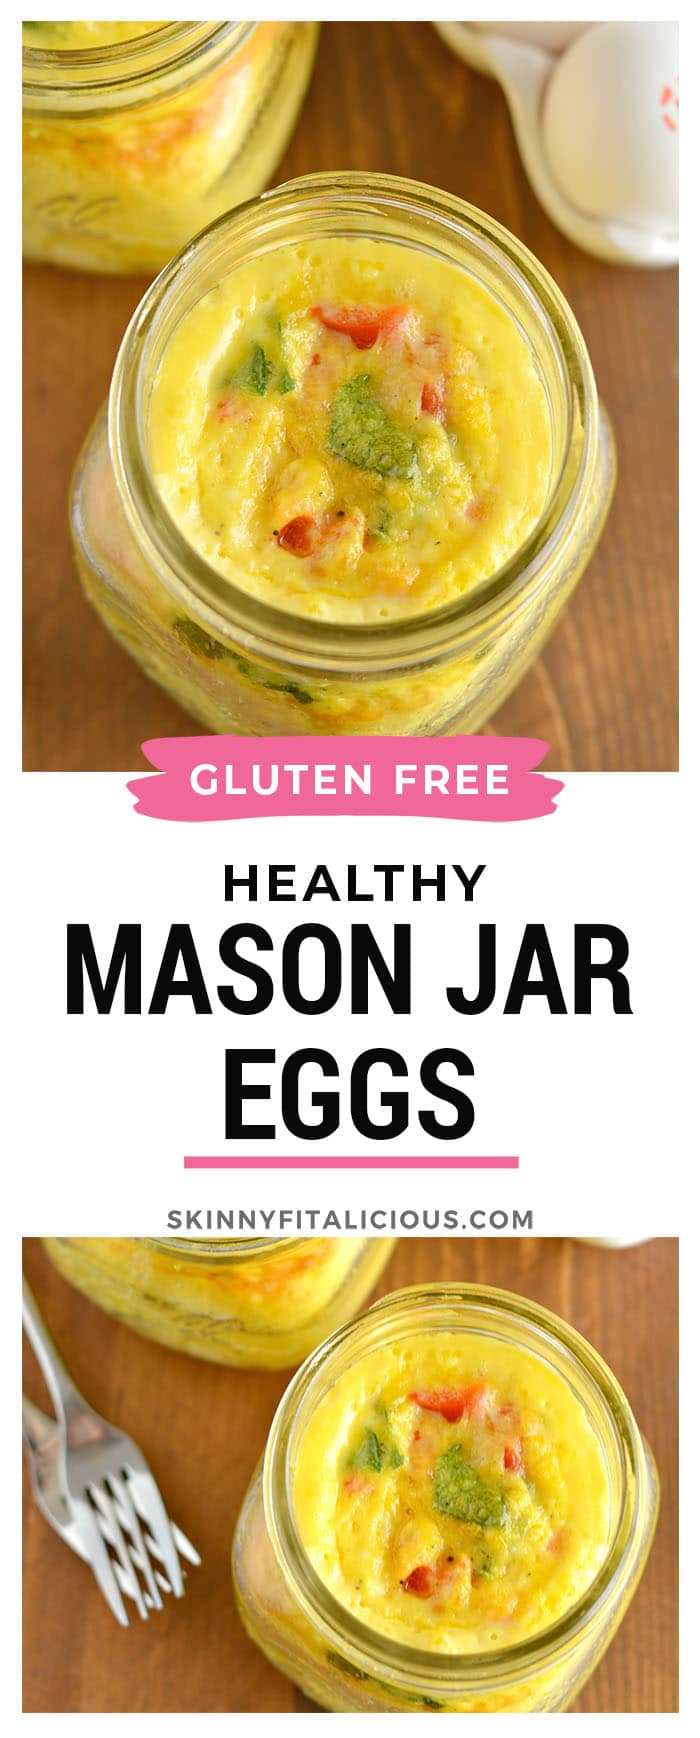 Mason Jar Eggs are the perfect on-the-go protein packed breakfast! These make ahead eggs are super easy, store fresh in the fridge for days and are completely customizable to your taste buds! Gluten Free + Low Calorie